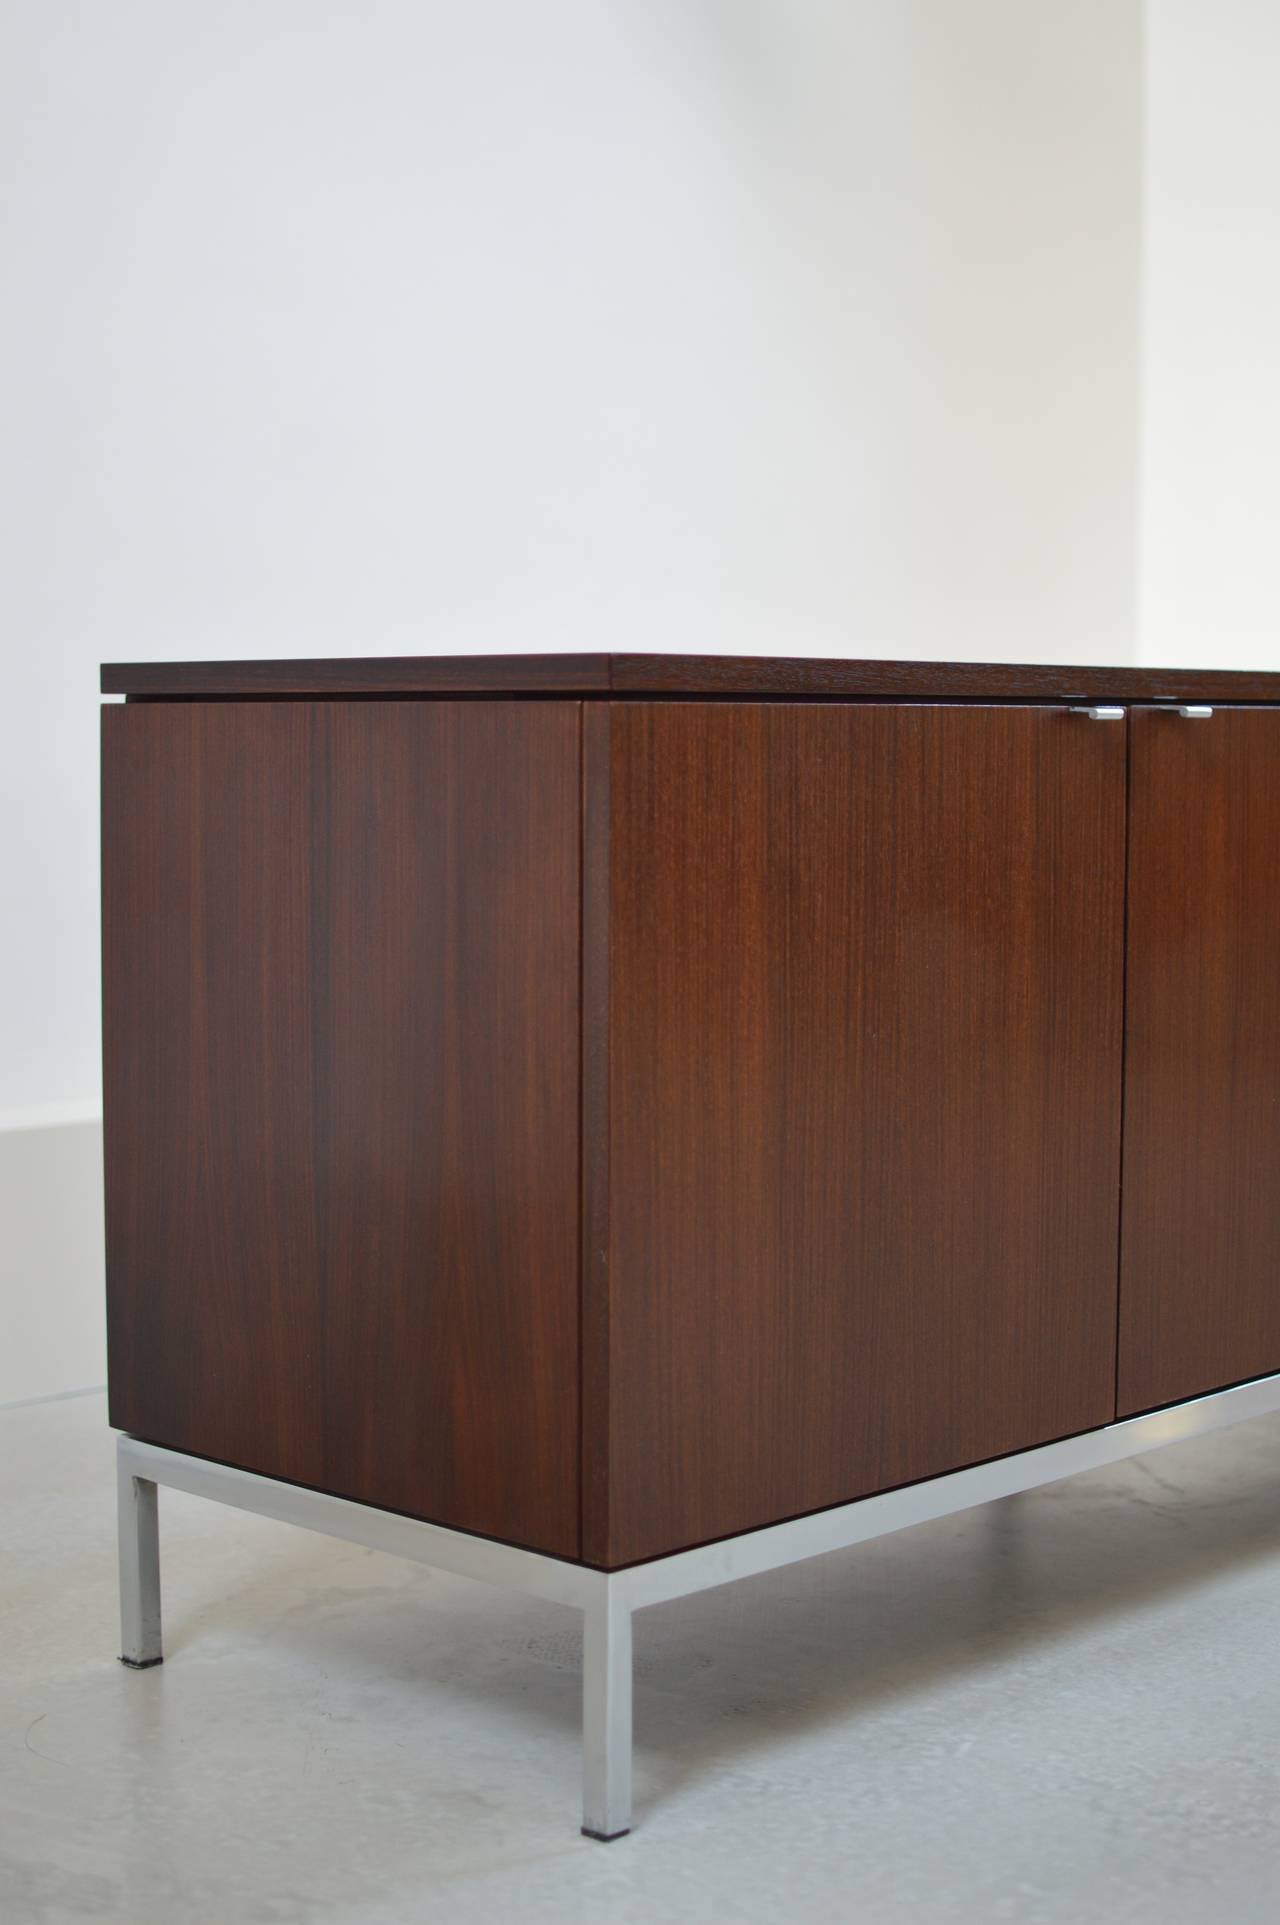 Four-door credenza by Florence Knoll in rich dark brown mahogany with plain pulls on beautiful seamless base. 
Early 1960s example. Comes with original manufacturer's label.